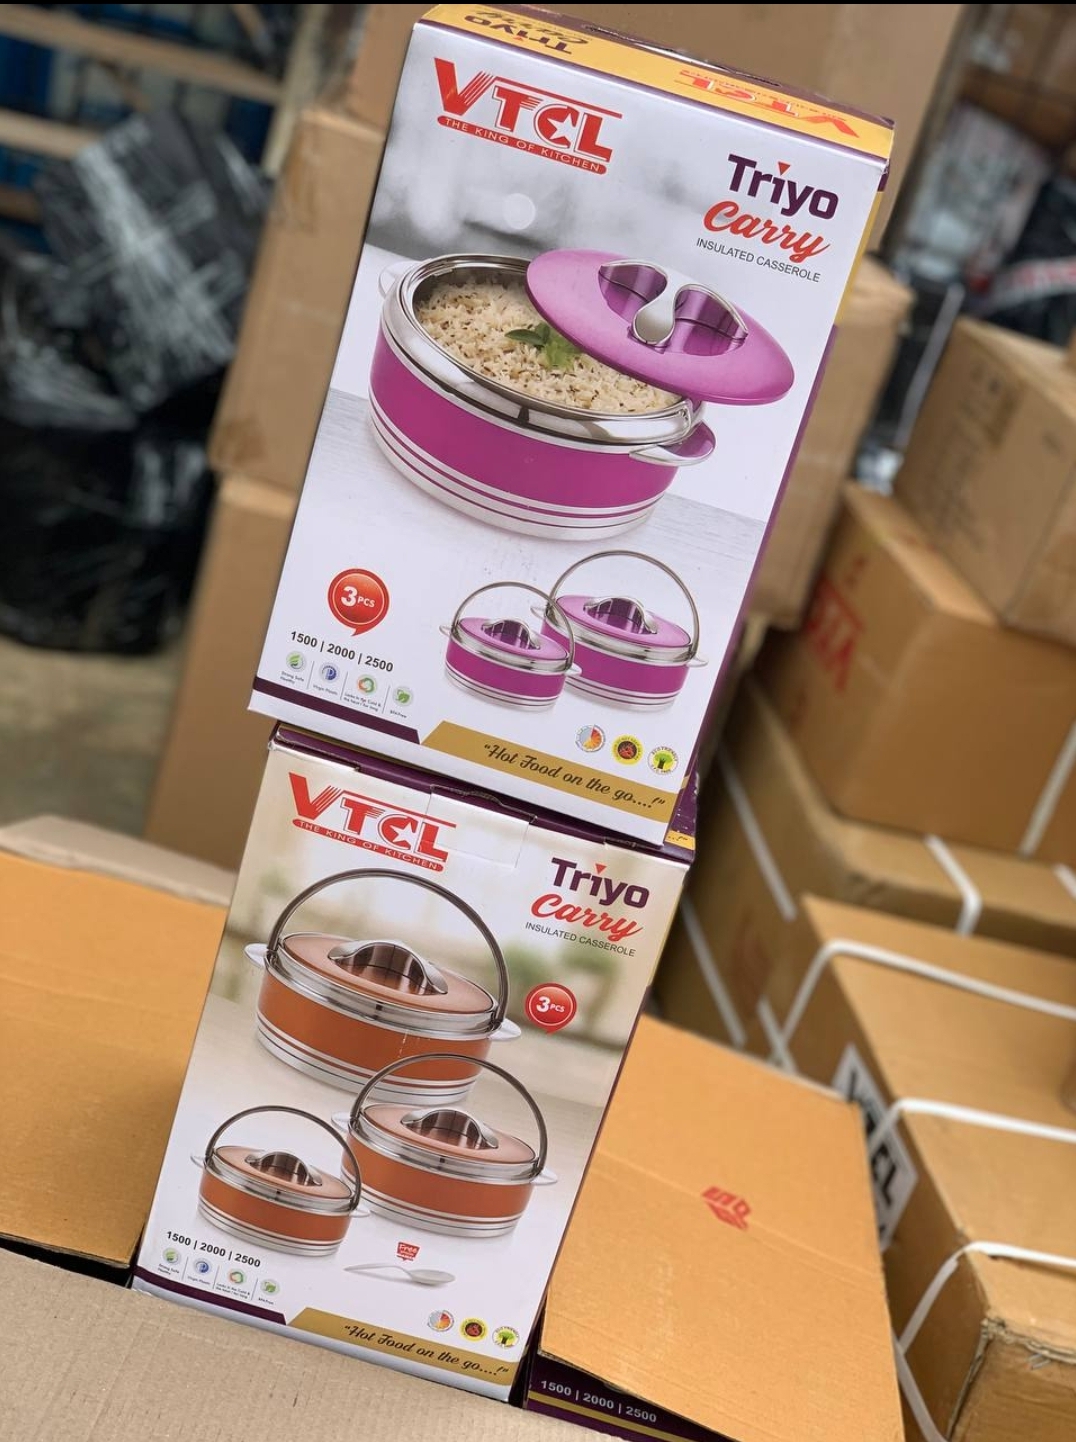 3in1 Vtcl Triyo Carry Insulated Bowl